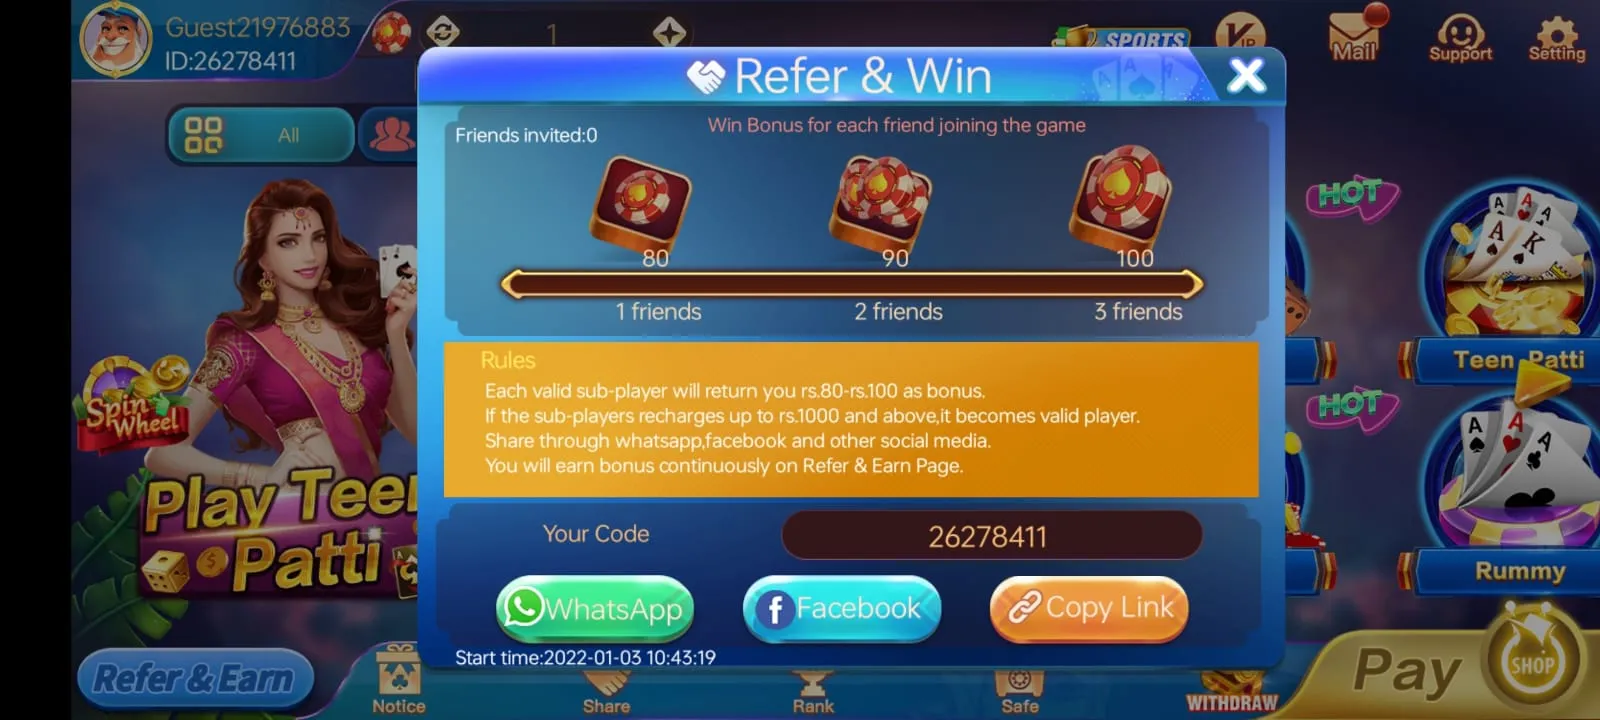 refer and earn image